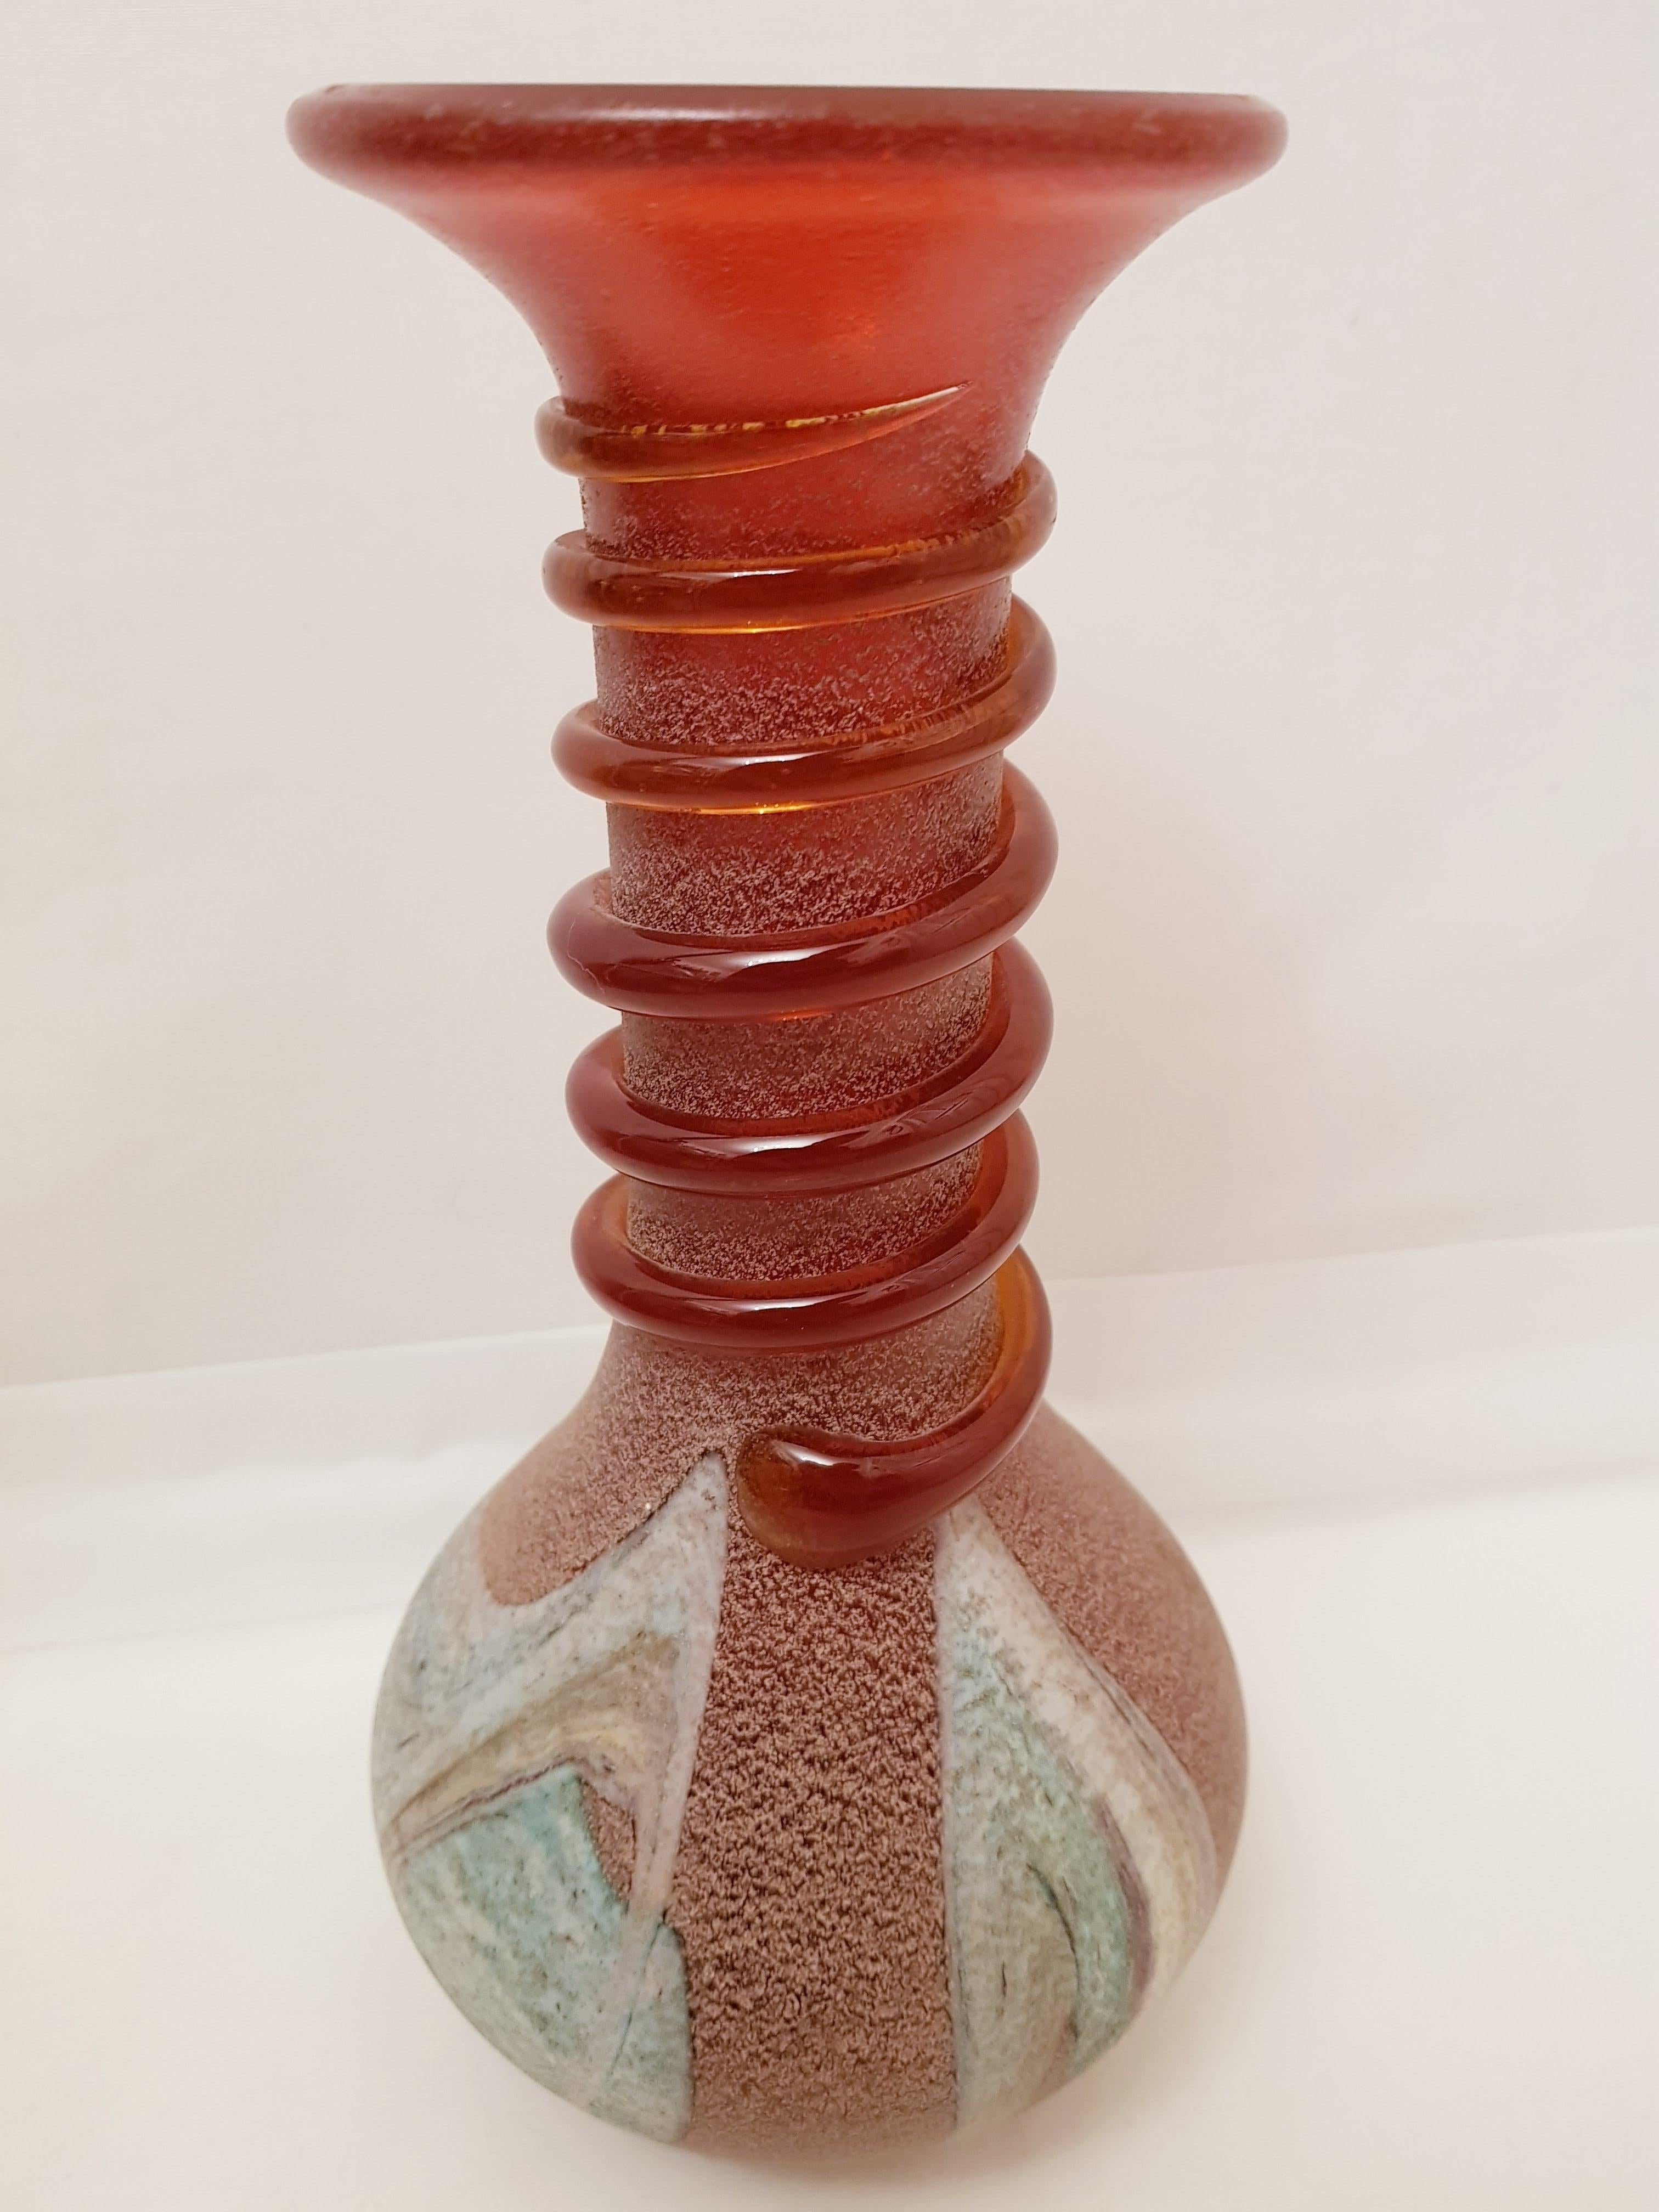 Beautiful middle of century murano glass scavo vase by Gino Cendese brilliant condition.